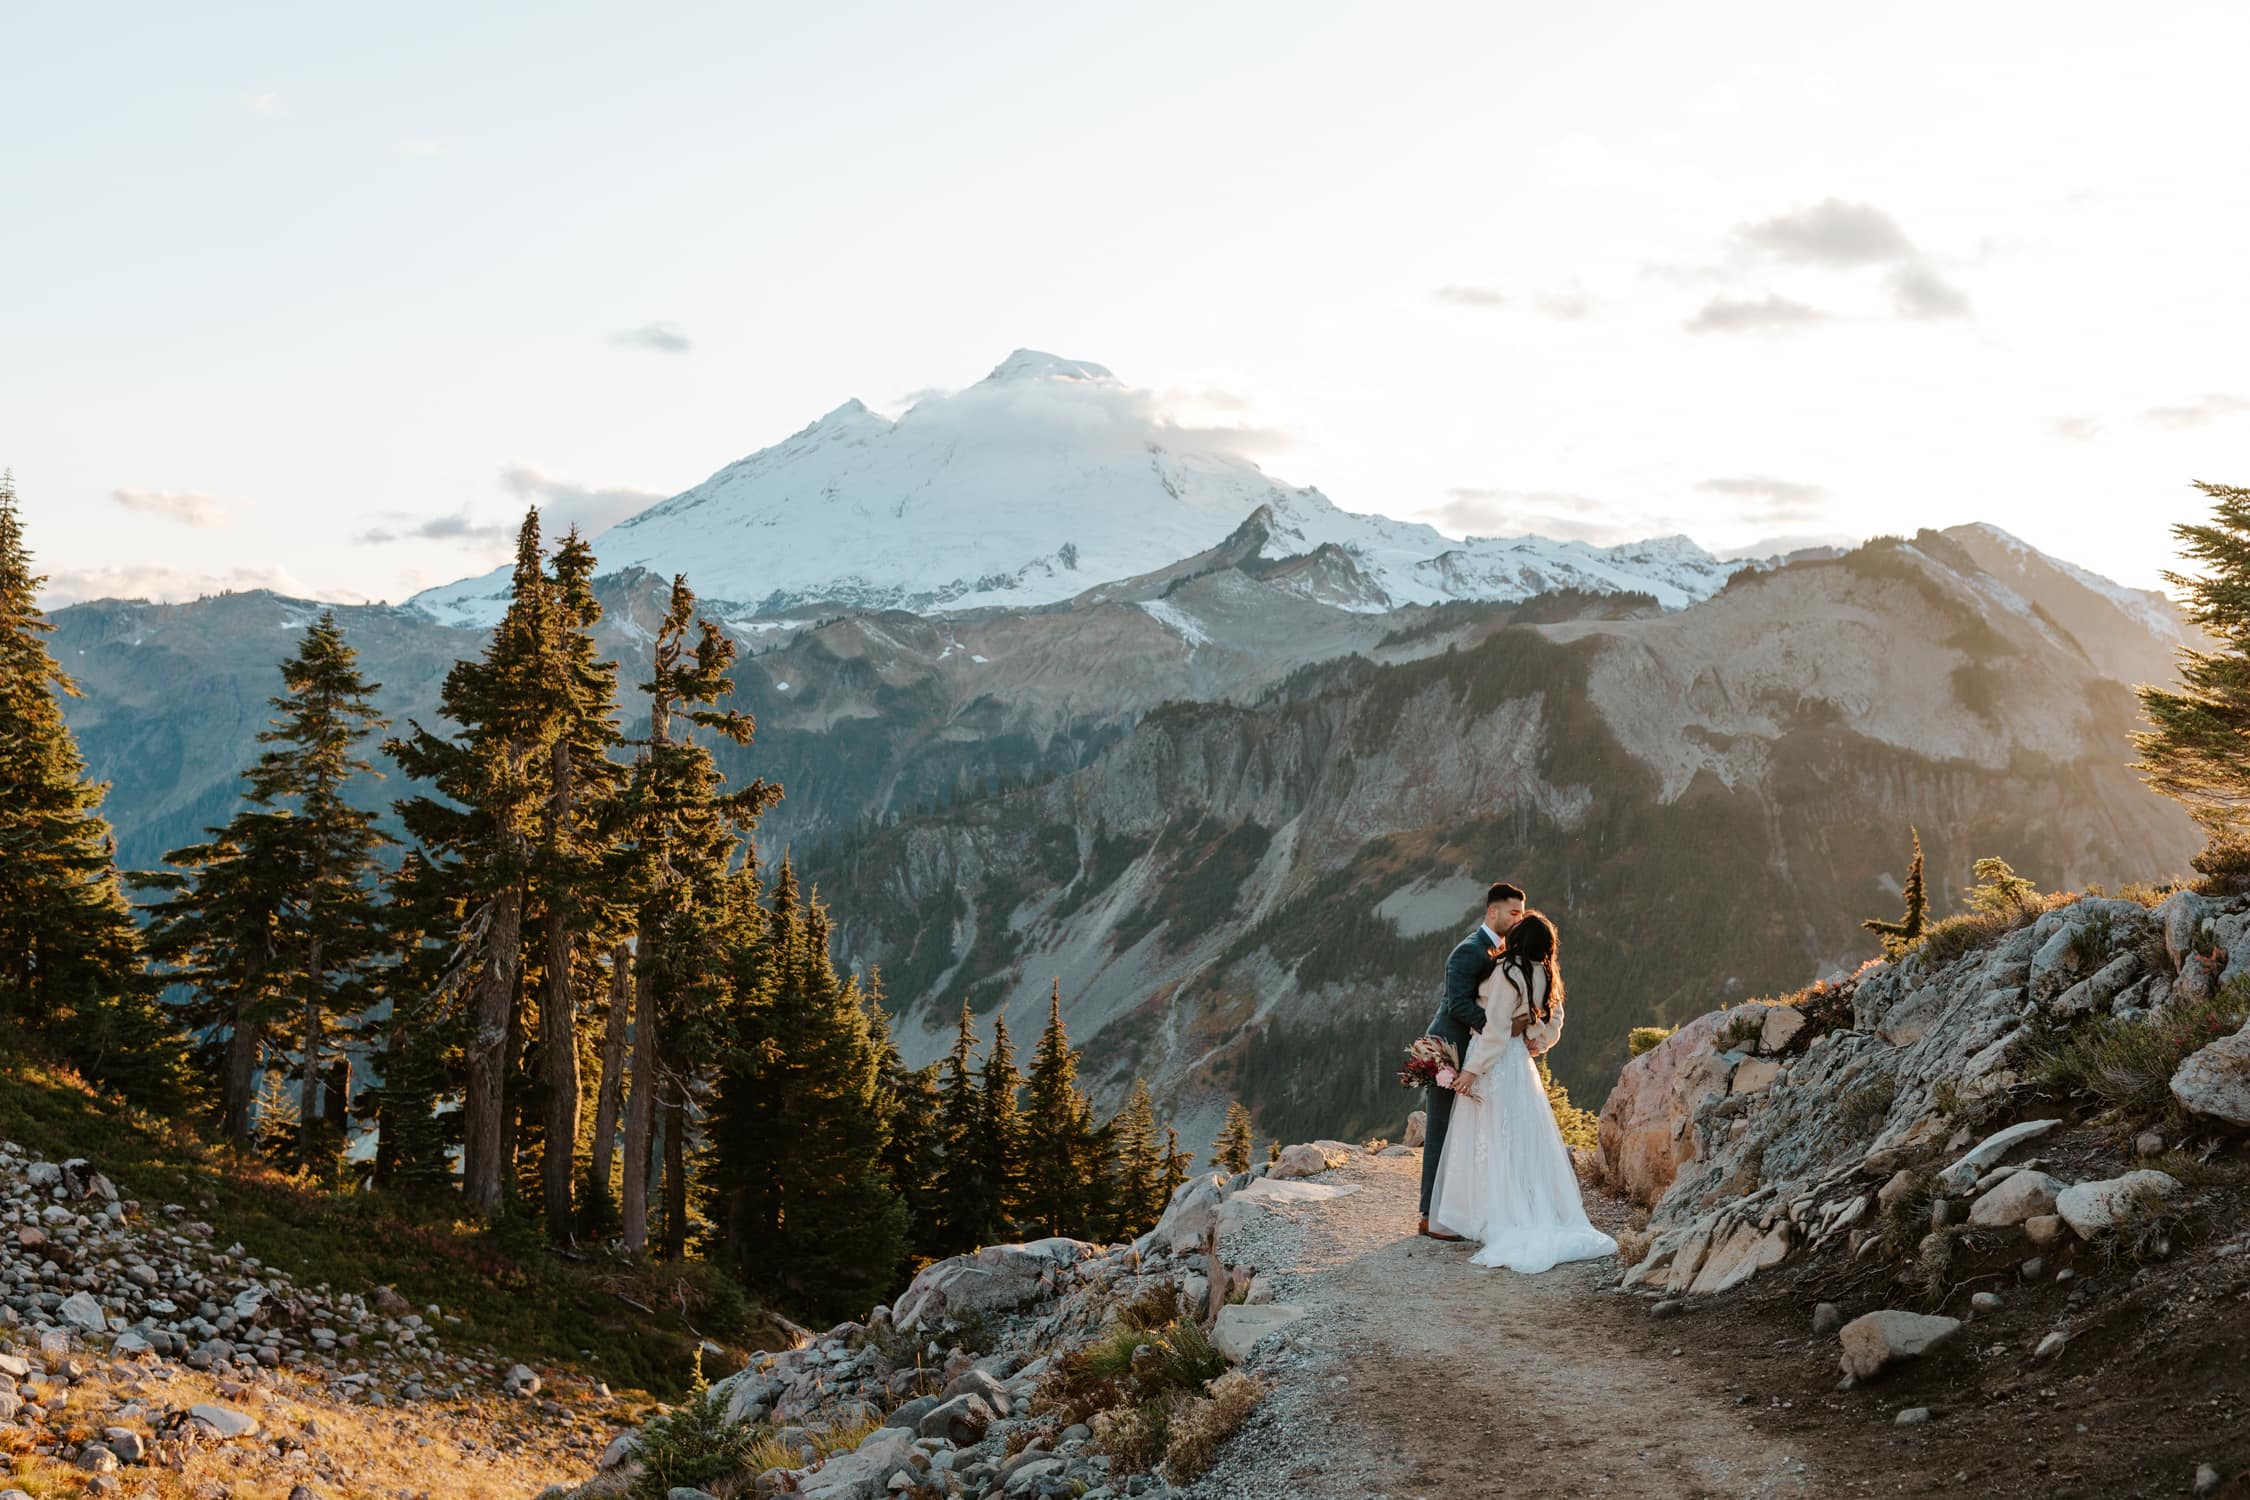 A couple in wedding attire kissing in front of Mt. Baker.